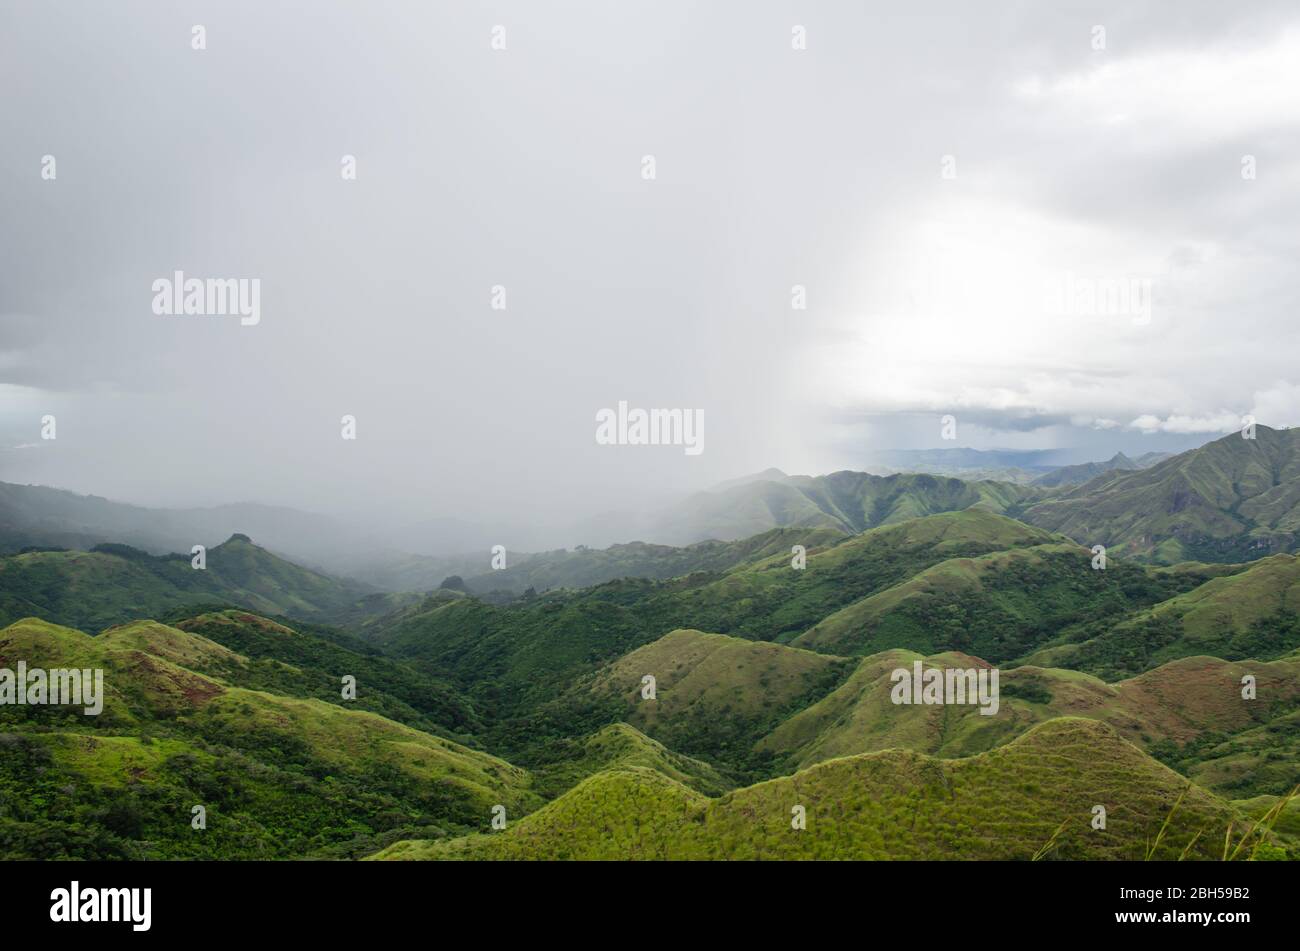 Captivating mountain landscape in Central Panama, with dense clouds enveloping the sky and gentle rain falling over the verdant hills. Stock Photo